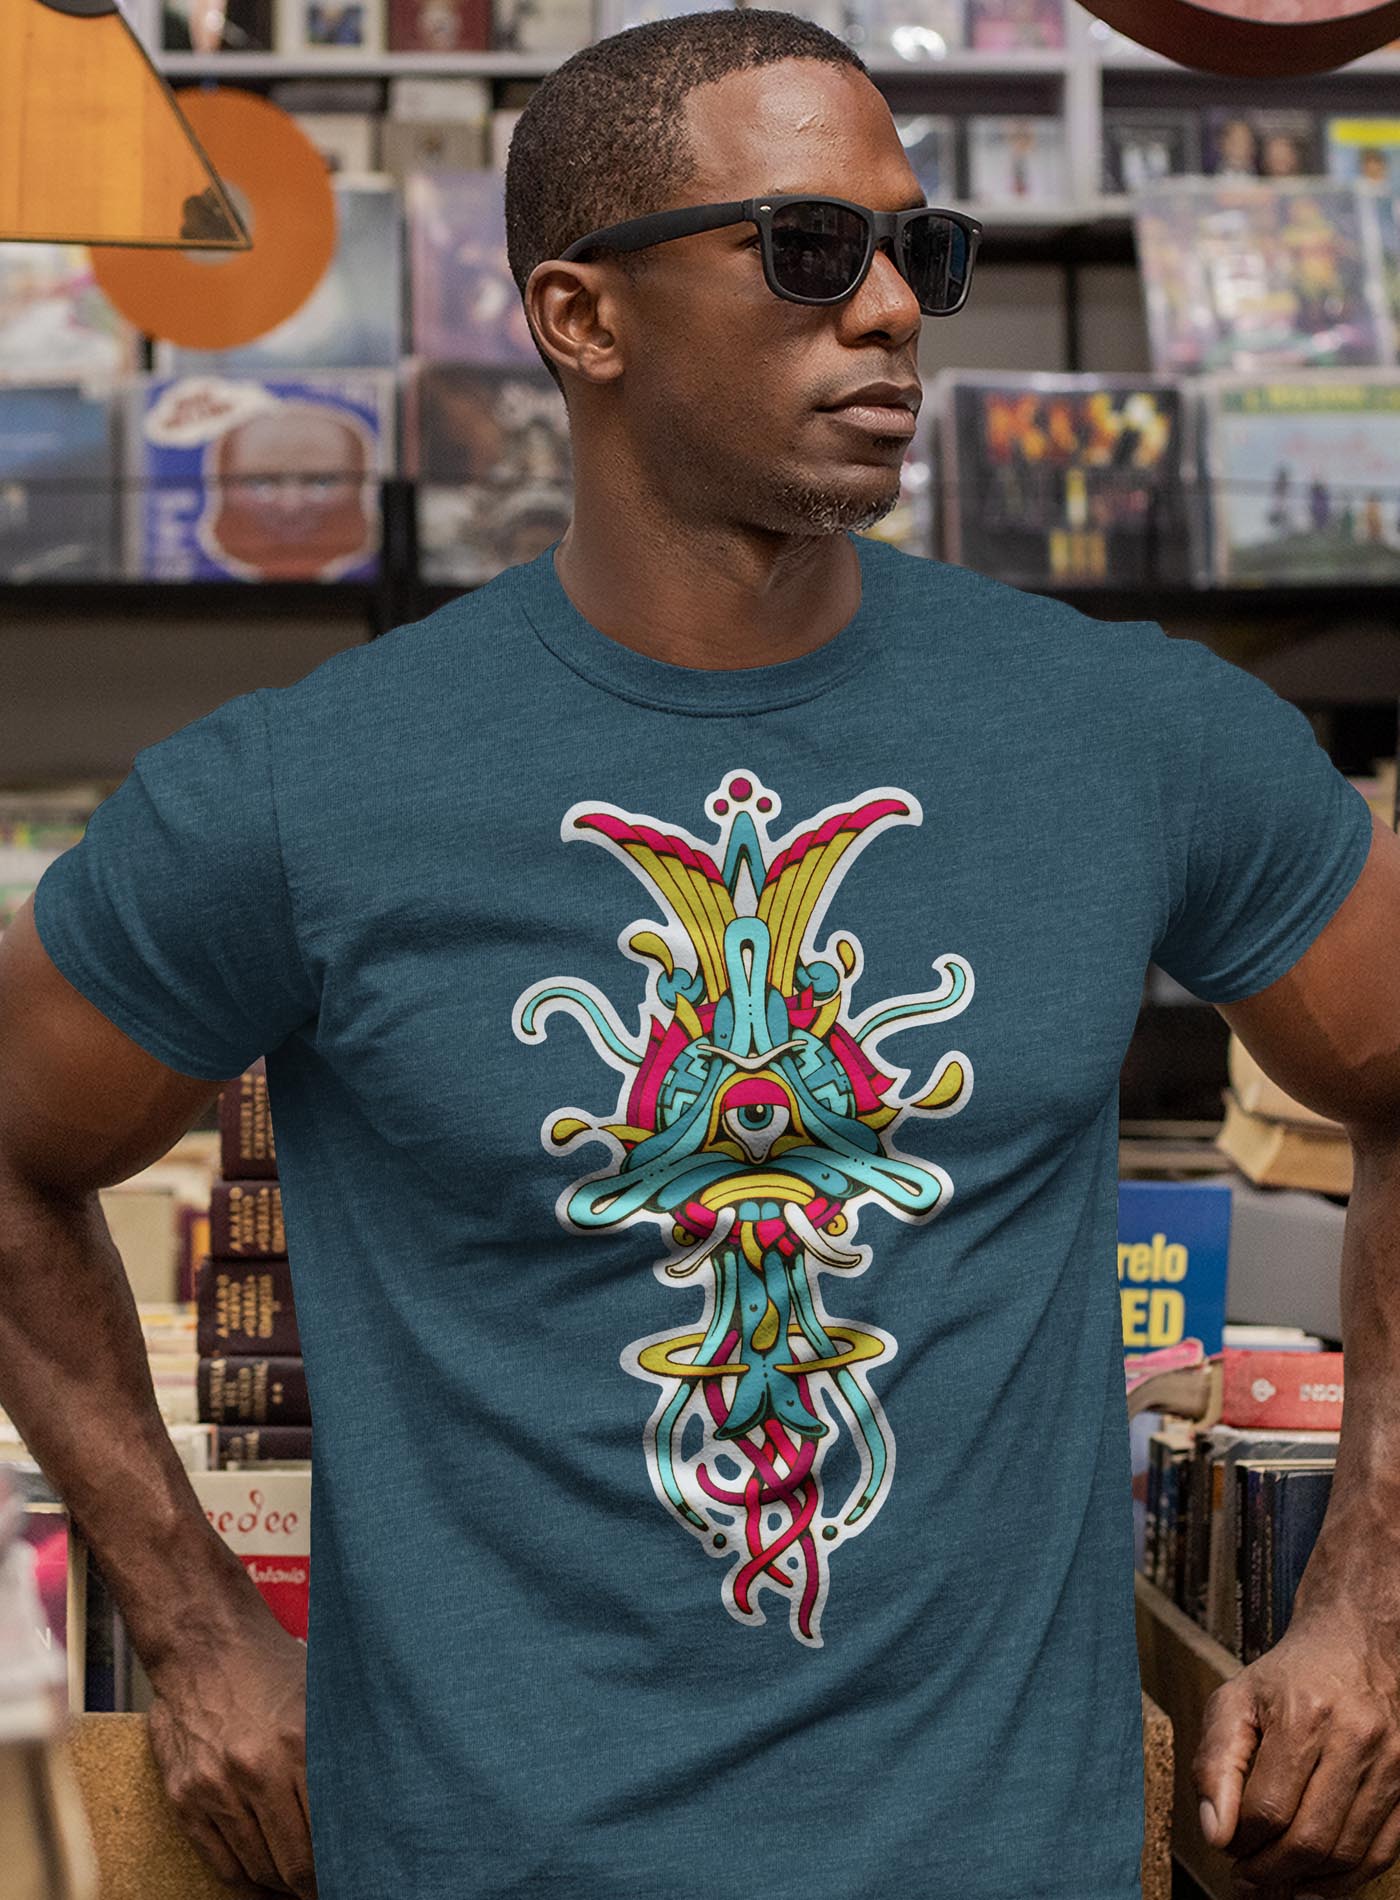 man modeling a Heather blue unisex t-shirt featuring a front print of the Toltec-Aztec goddess of grass illustrated by G.M. Meave